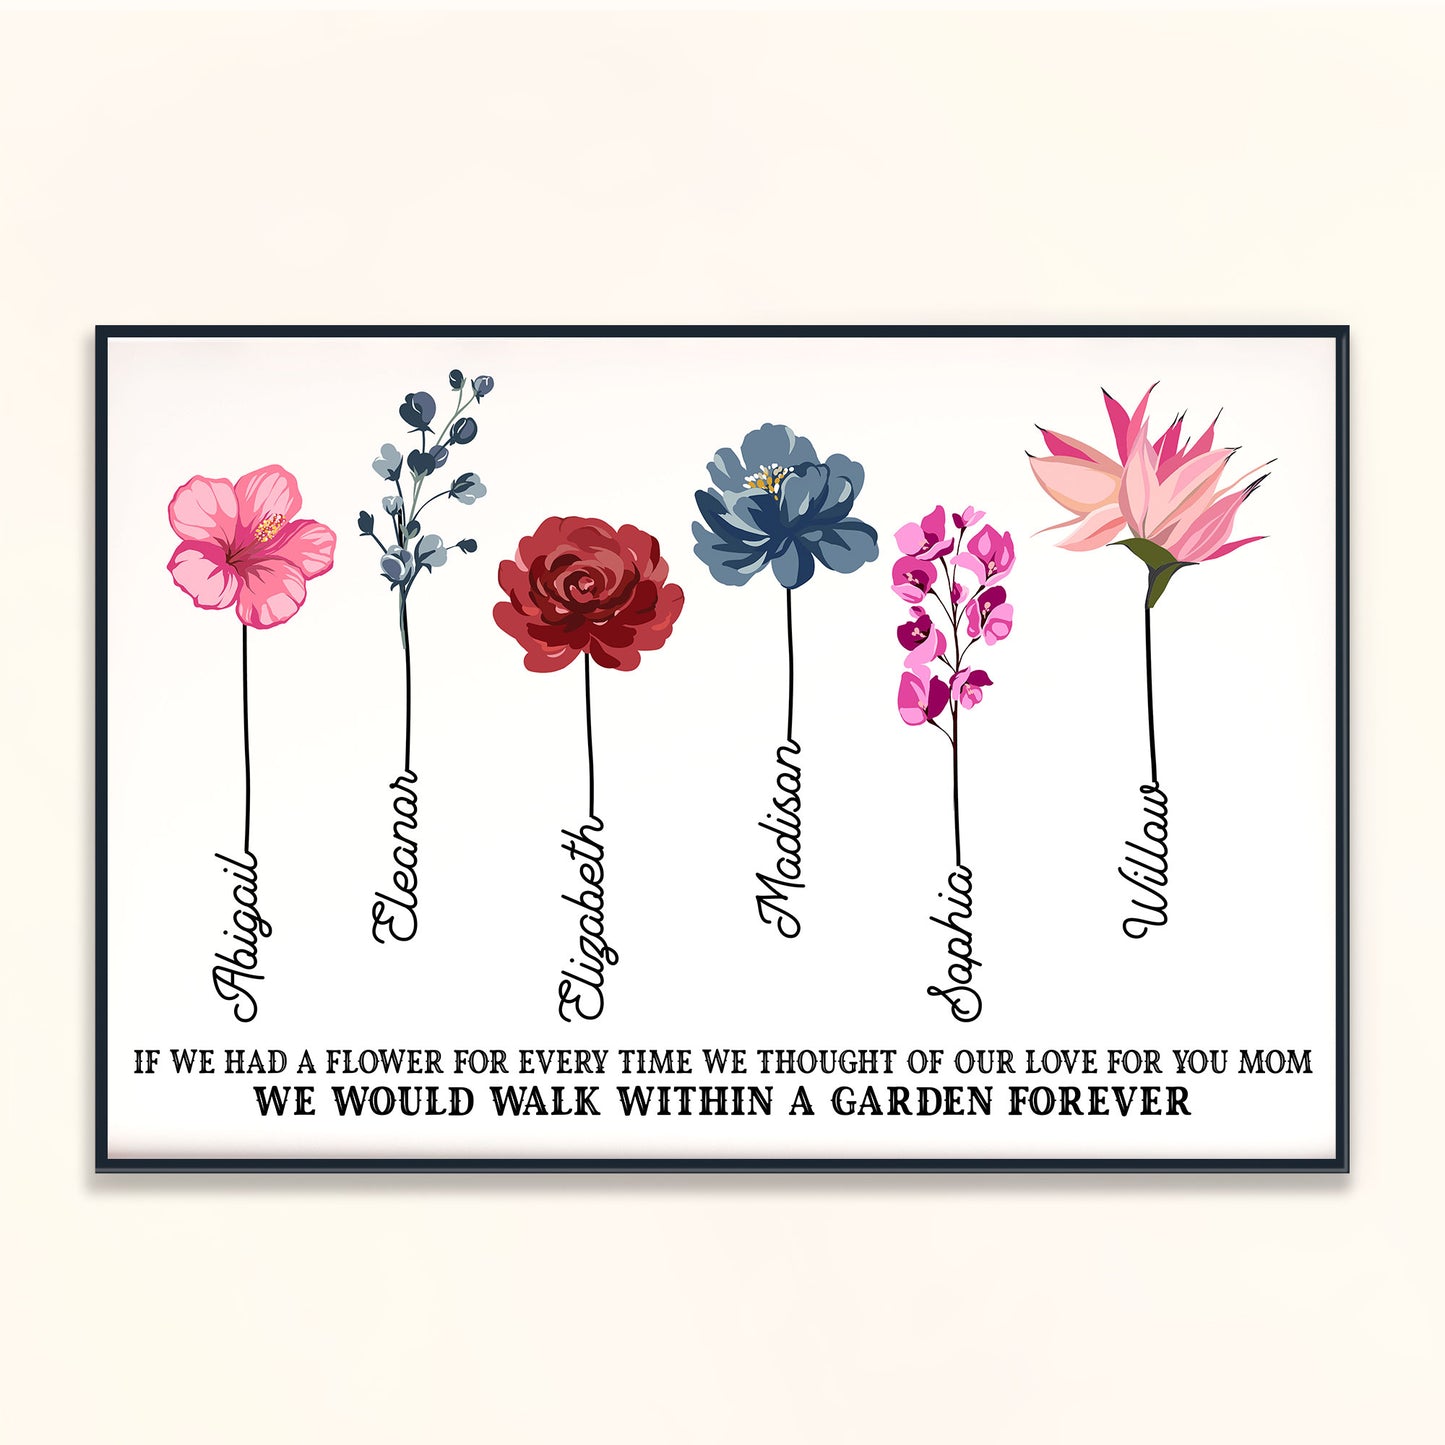 If We Had A Flower For Every Time We Thought Of Our Love For You - Personalized Poster/Wrapped Canvas - Birthday, Mother's Day Gift For Mom, Grandma, Auntie